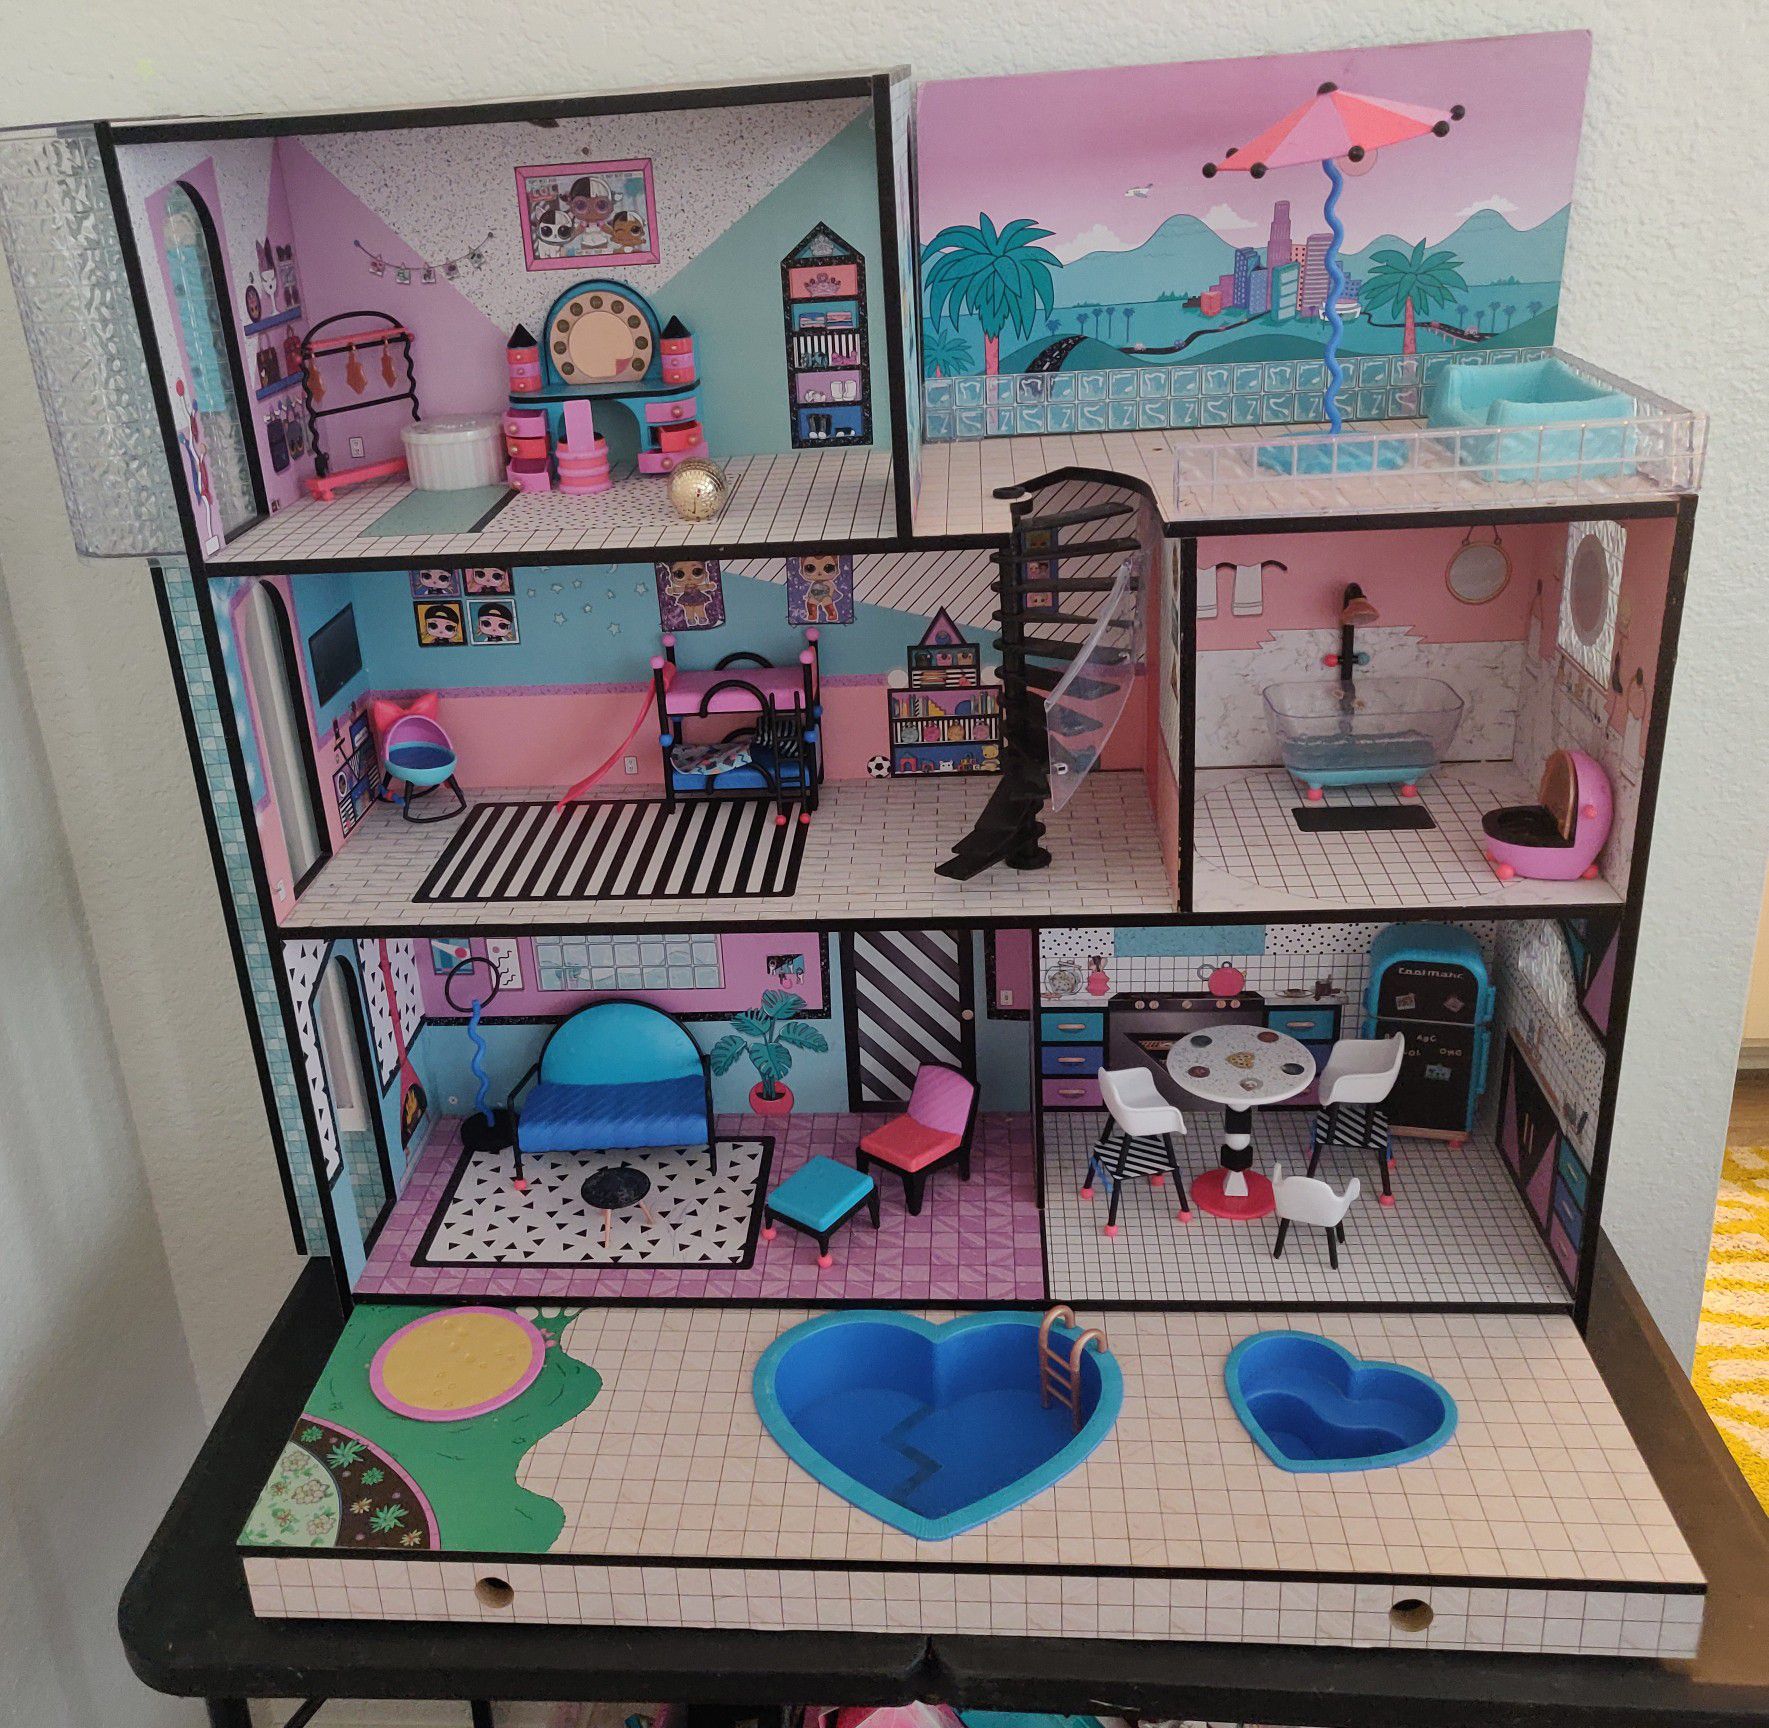 LOL Surprise wooden doll house